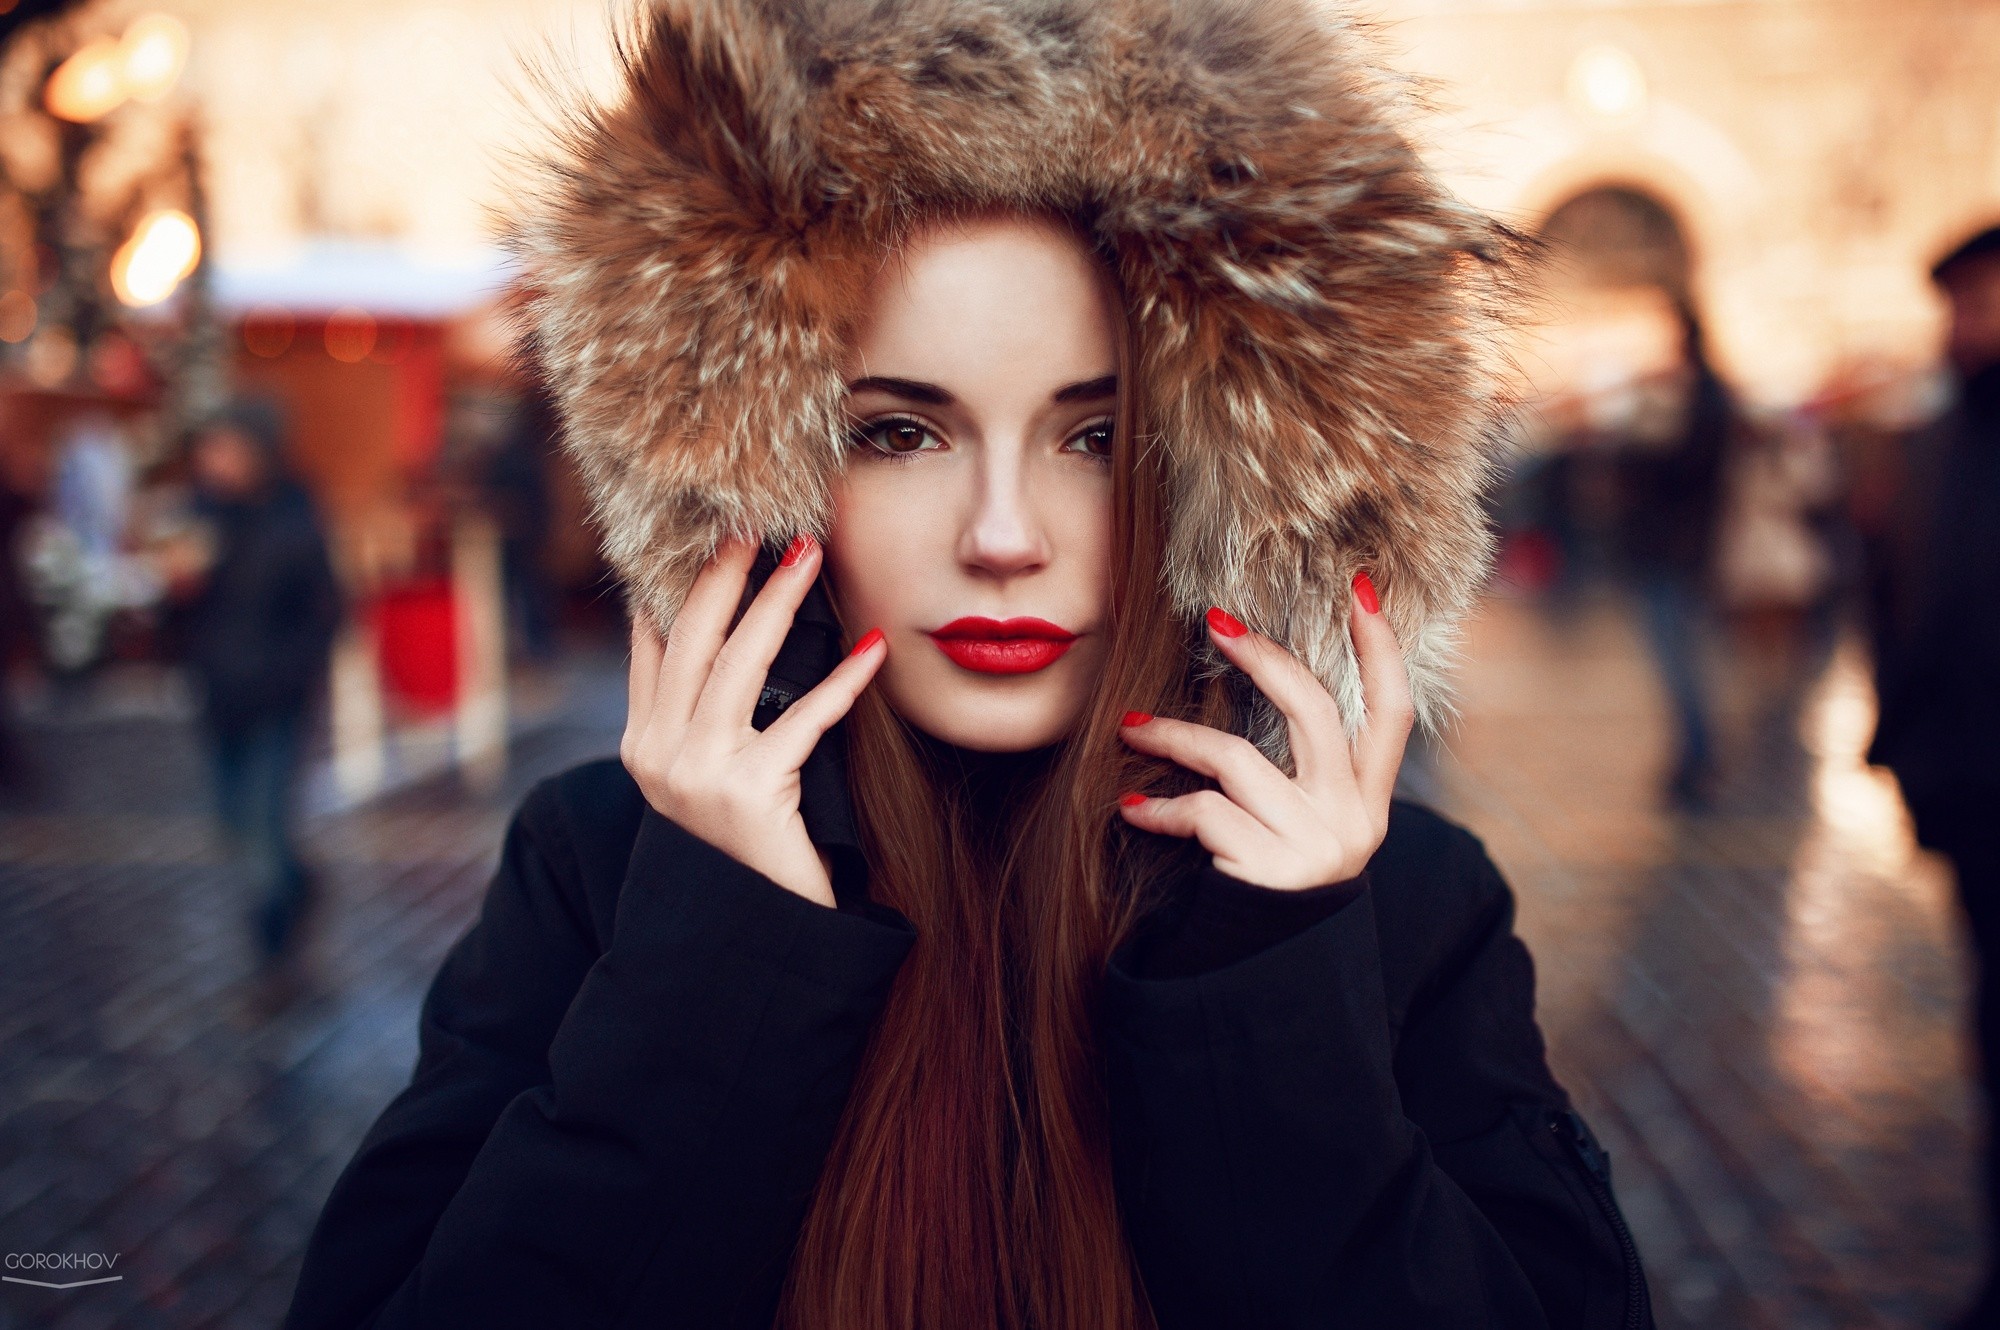 Women Model Redhead Face Red Lipstick Red Nails Fashion Women Outdoors Airbrushed Sasha Spilberg Iva 2000x1330